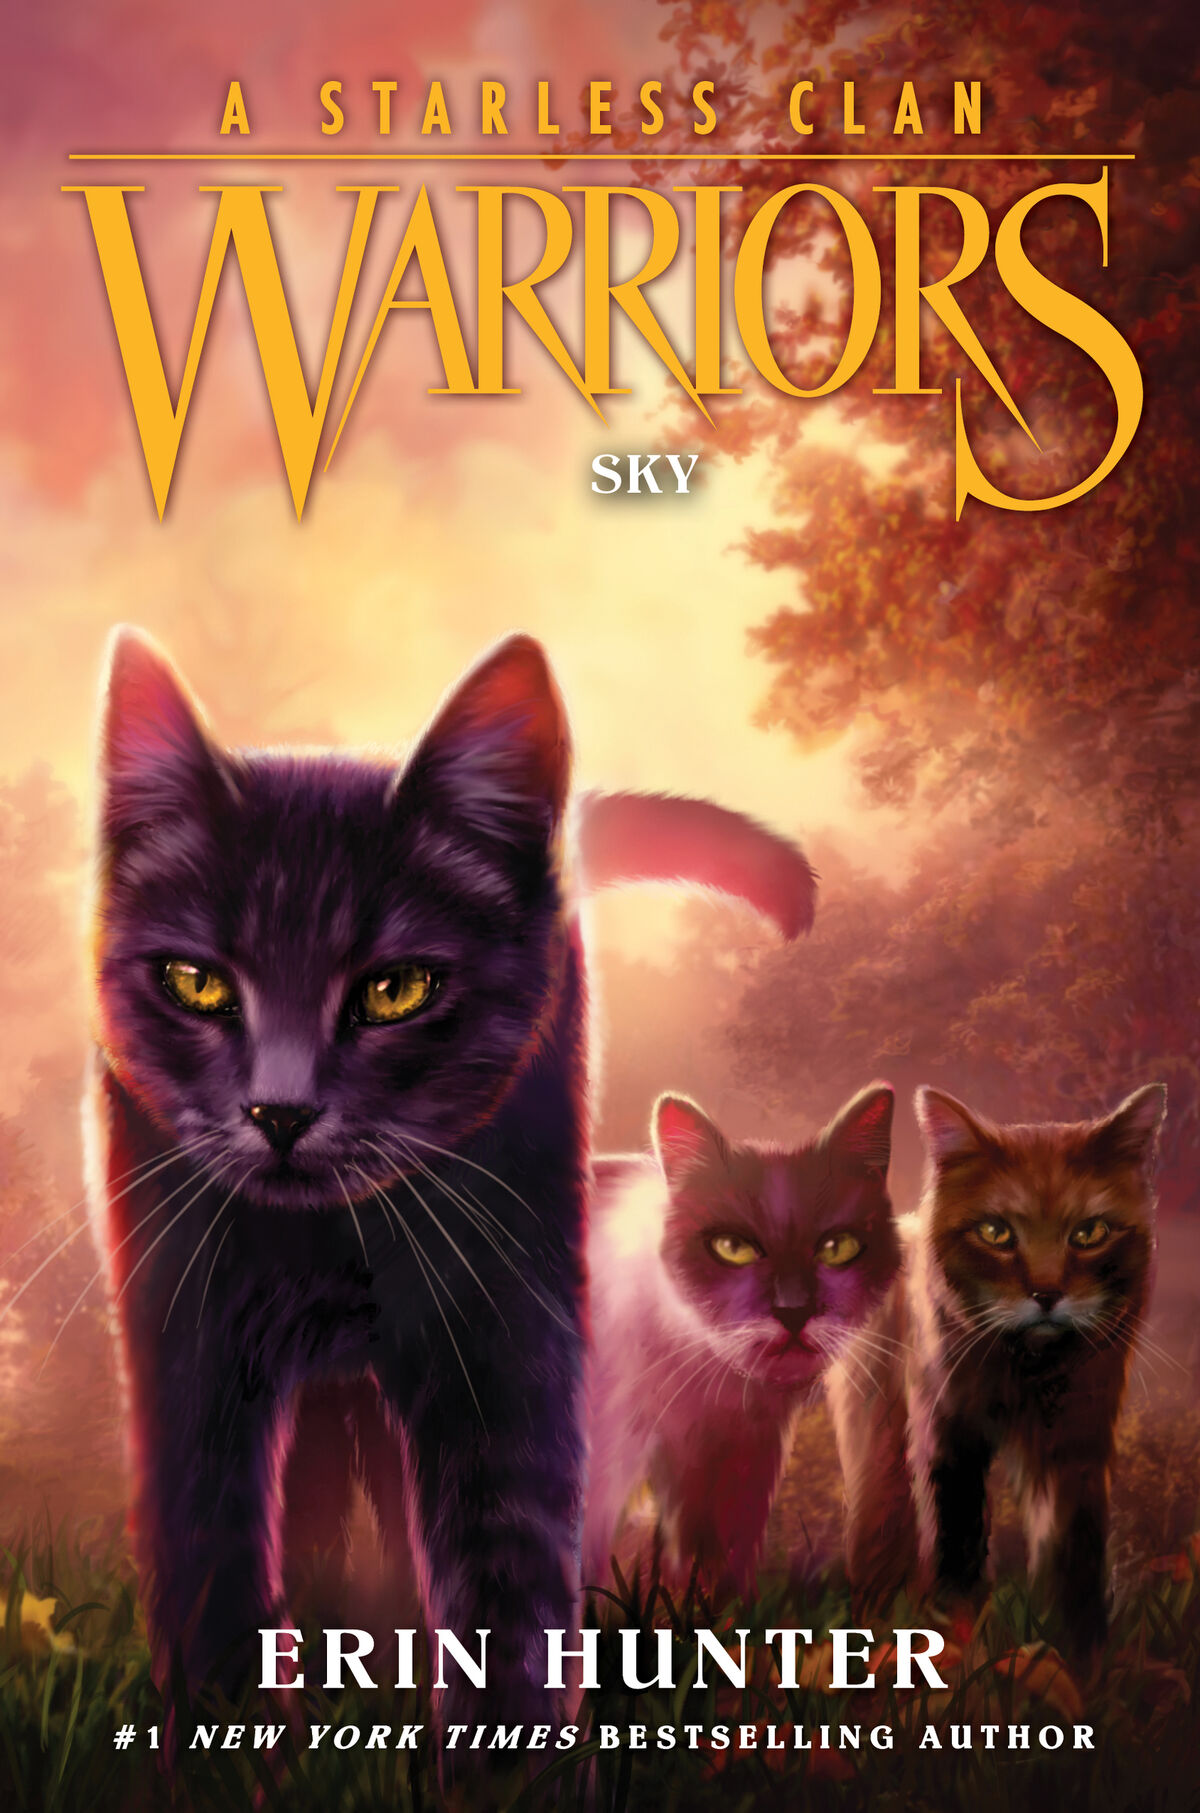 Warrior Cats Movie Announced! - Why You Should Be Excited! 